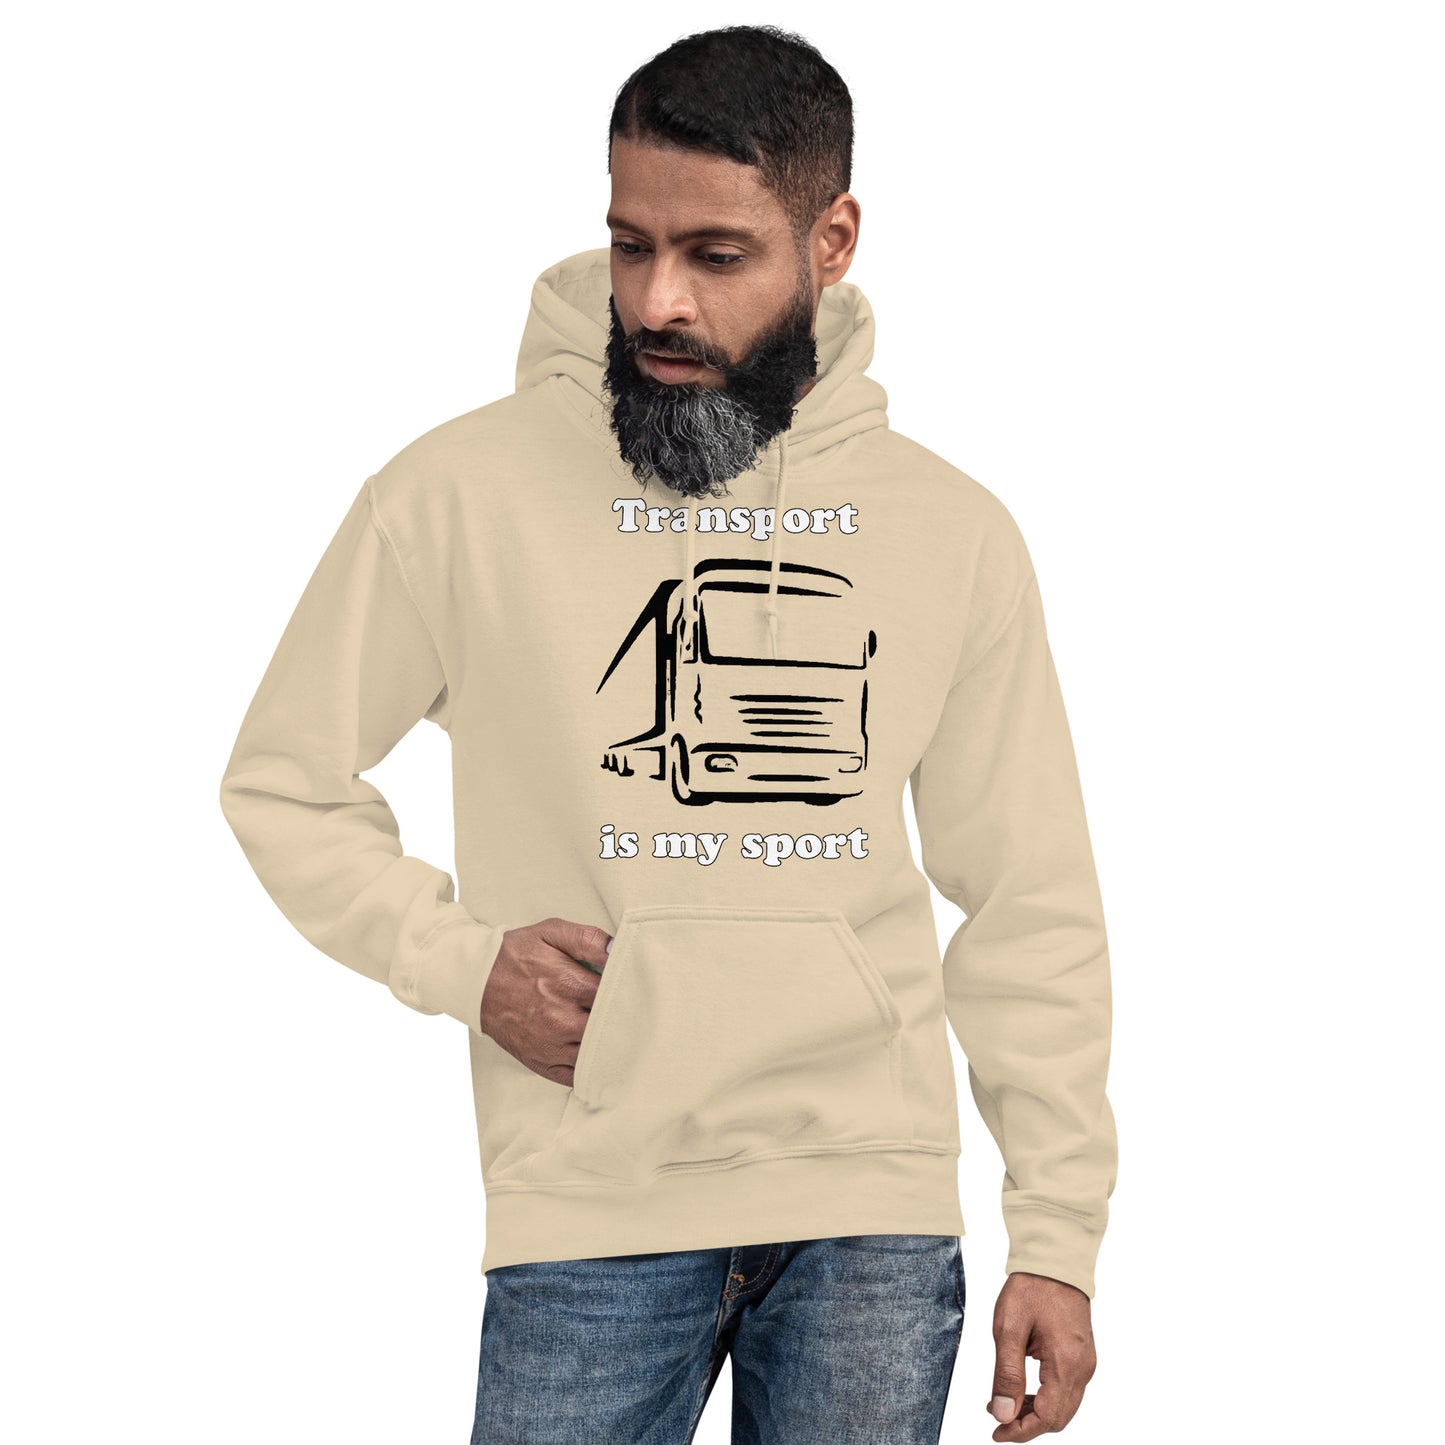 Man with sand hoodie with picture of truck and text "Transport is my sport"